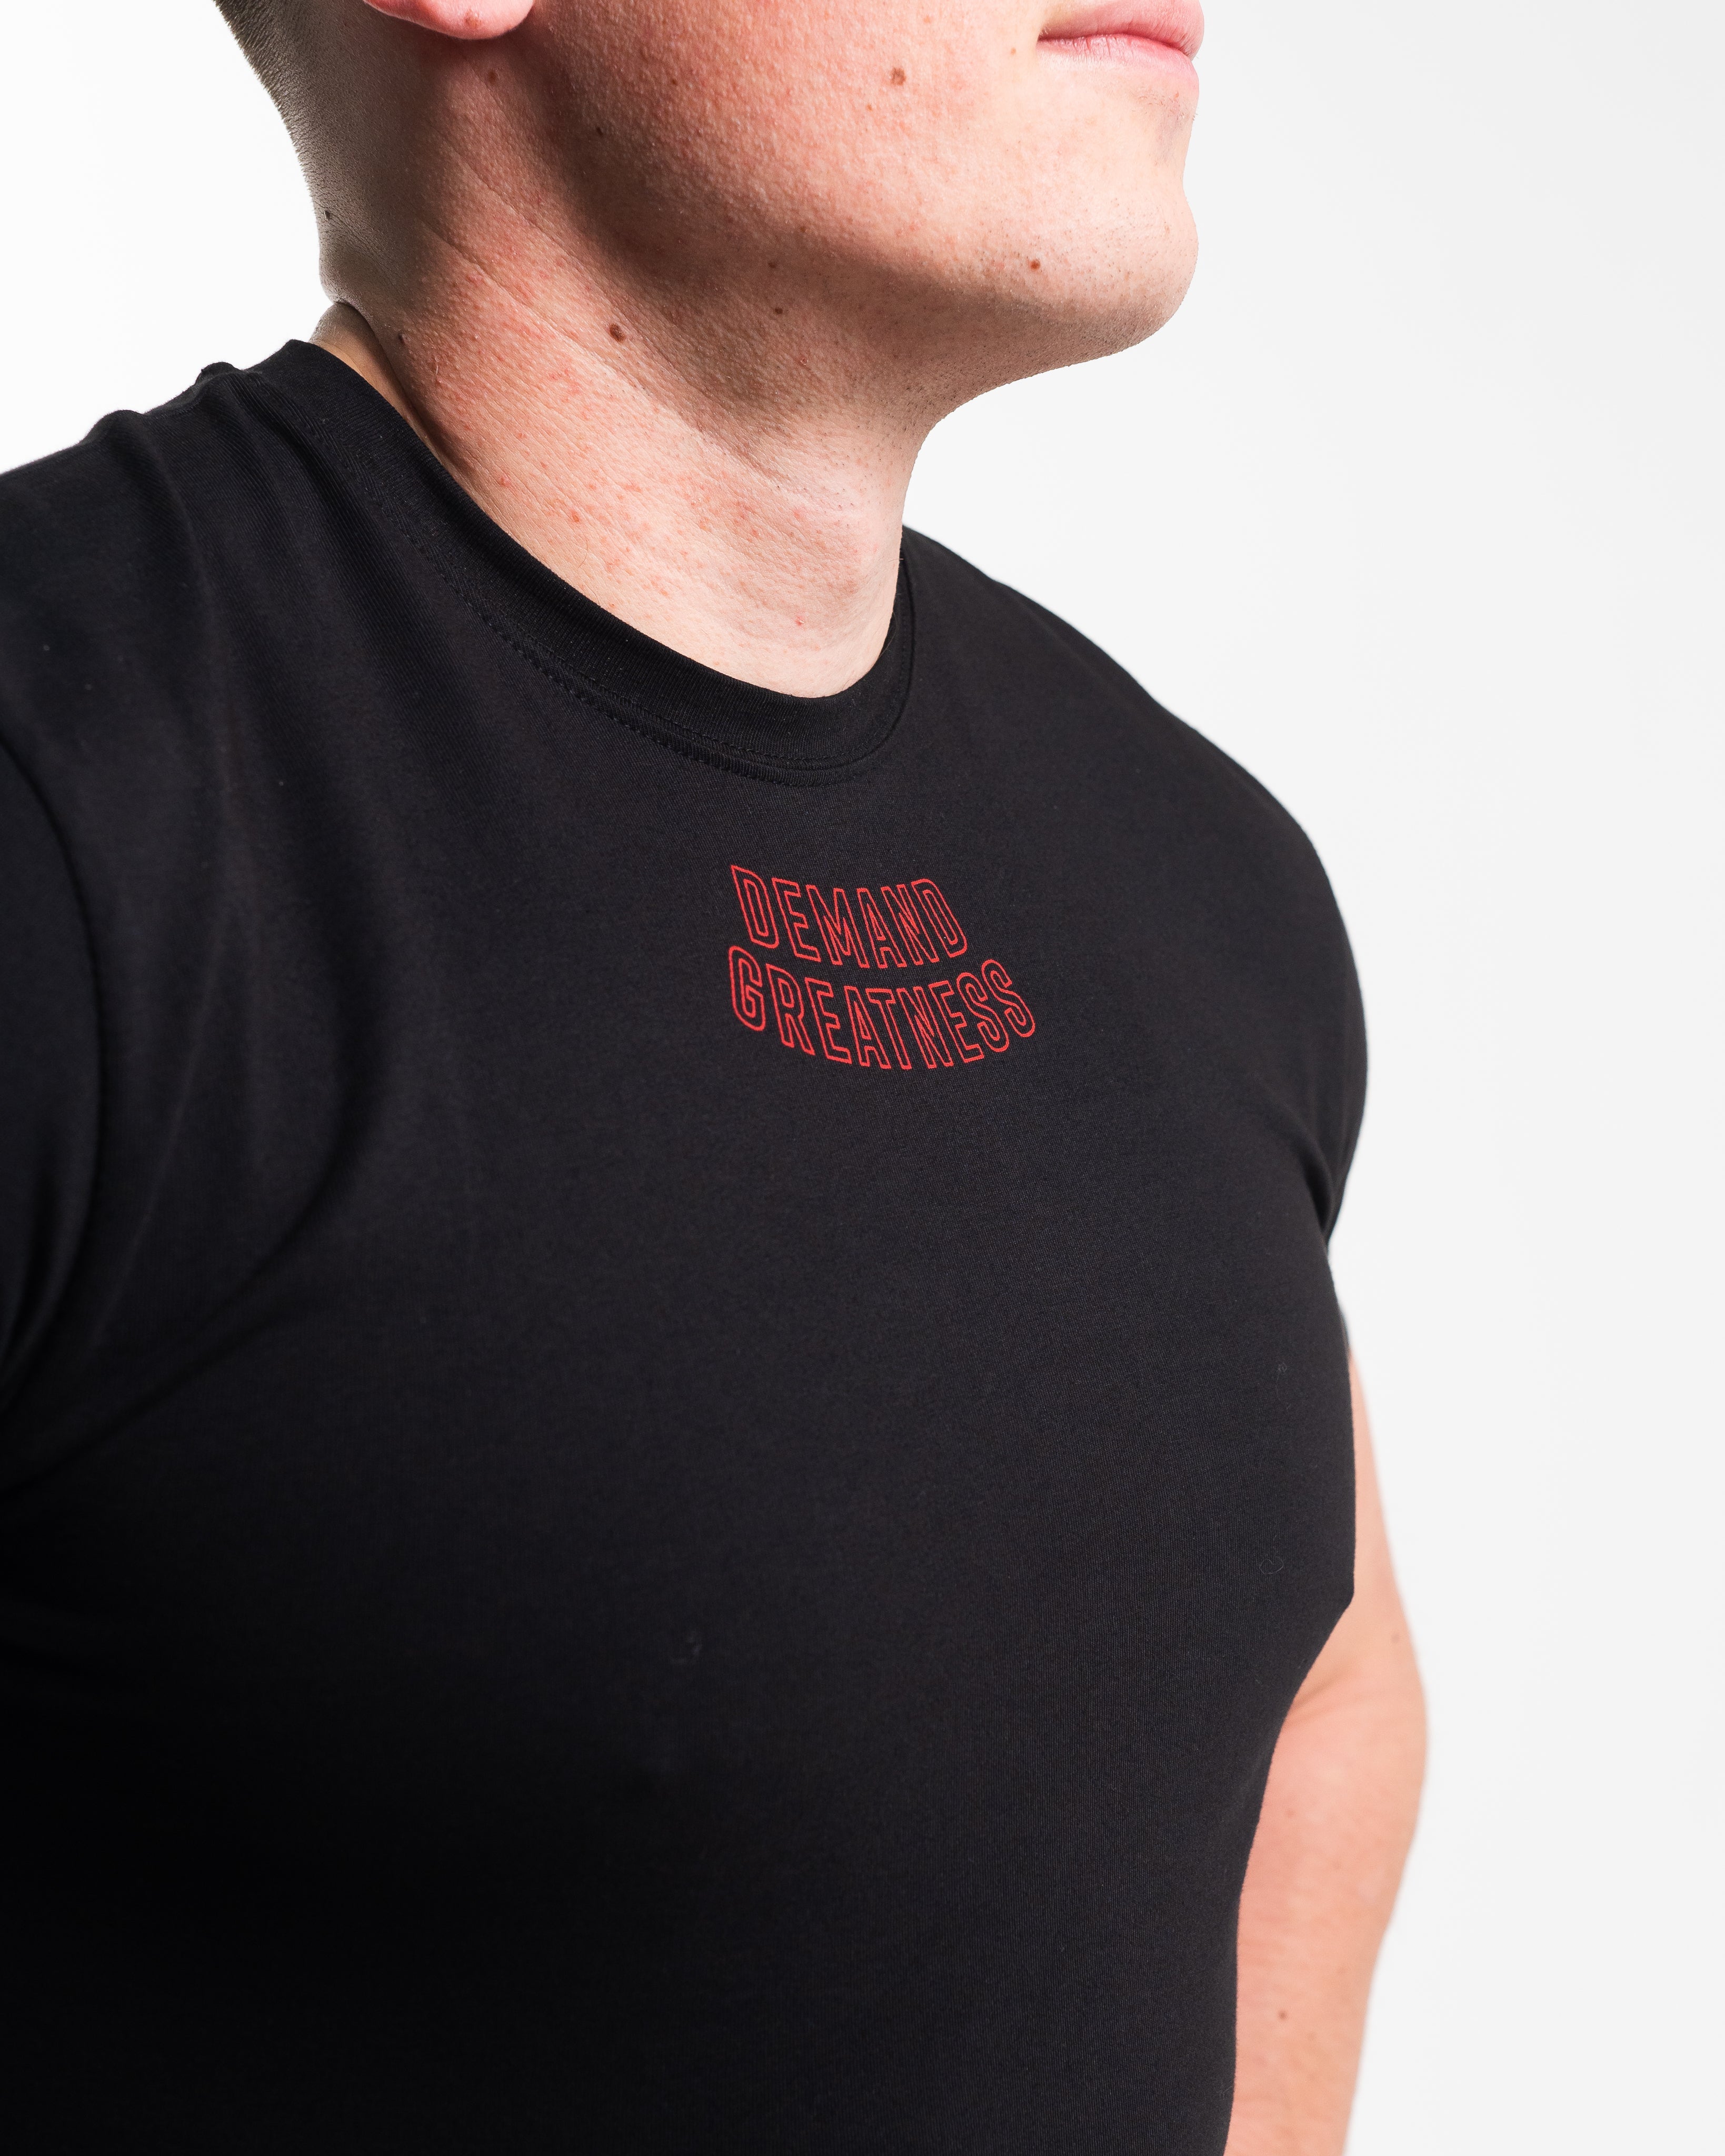 DG23 IPF Approved Meet Shirt Red Dawn is our new meet shirt highlighting Demand Greatness with a double outline font to showcase your impact on the platform. Shop the full A7 Powerlifting IPF Approved Equipment collection including Powerlifting Singlet, A7 Meet Shirt, A7 Zebra Wrist Wraps, A7 Deadlift Socks, Hourglass Knee Sleeves (Stiff Knee Sleeves and Rigor Mortis Knee Sleeves). PAL Lever is now IPF Approved. Genouillères powerlifting shipping to France, Spain, Ireland, Germany, Italy, Sweden and EU. 